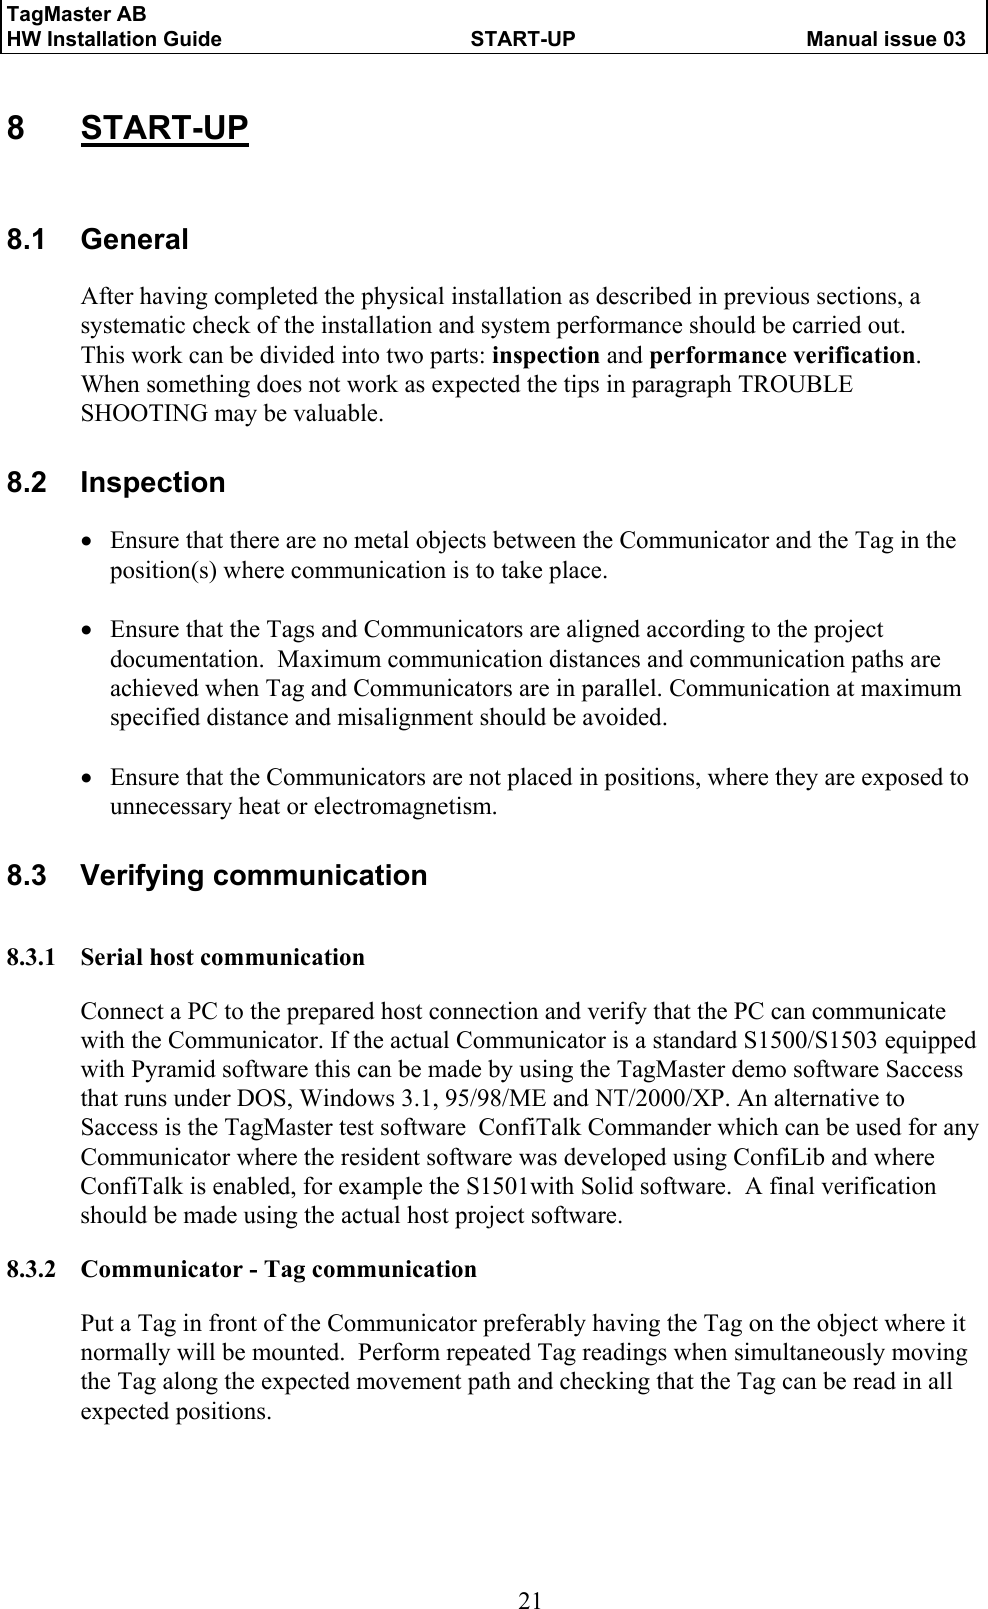 TagMaster AB     HW Installation Guide  START-UP  Manual issue 03  21 8 START-UP 8.1 General After having completed the physical installation as described in previous sections, a systematic check of the installation and system performance should be carried out. This work can be divided into two parts: inspection and performance verification. When something does not work as expected the tips in paragraph TROUBLE SHOOTING may be valuable.  8.2 Inspection • Ensure that there are no metal objects between the Communicator and the Tag in the position(s) where communication is to take place.  • Ensure that the Tags and Communicators are aligned according to the project documentation.  Maximum communication distances and communication paths are achieved when Tag and Communicators are in parallel. Communication at maximum specified distance and misalignment should be avoided.  • Ensure that the Communicators are not placed in positions, where they are exposed to unnecessary heat or electromagnetism. 8.3 Verifying communication 8.3.1 Serial host communication  Connect a PC to the prepared host connection and verify that the PC can communicate with the Communicator. If the actual Communicator is a standard S1500/S1503 equipped with Pyramid software this can be made by using the TagMaster demo software Saccess that runs under DOS, Windows 3.1, 95/98/ME and NT/2000/XP. An alternative to Saccess is the TagMaster test software  ConfiTalk Commander which can be used for any Communicator where the resident software was developed using ConfiLib and where ConfiTalk is enabled, for example the S1501with Solid software.  A final verification should be made using the actual host project software.  8.3.2 Communicator - Tag communication Put a Tag in front of the Communicator preferably having the Tag on the object where it normally will be mounted.  Perform repeated Tag readings when simultaneously moving the Tag along the expected movement path and checking that the Tag can be read in all expected positions.     